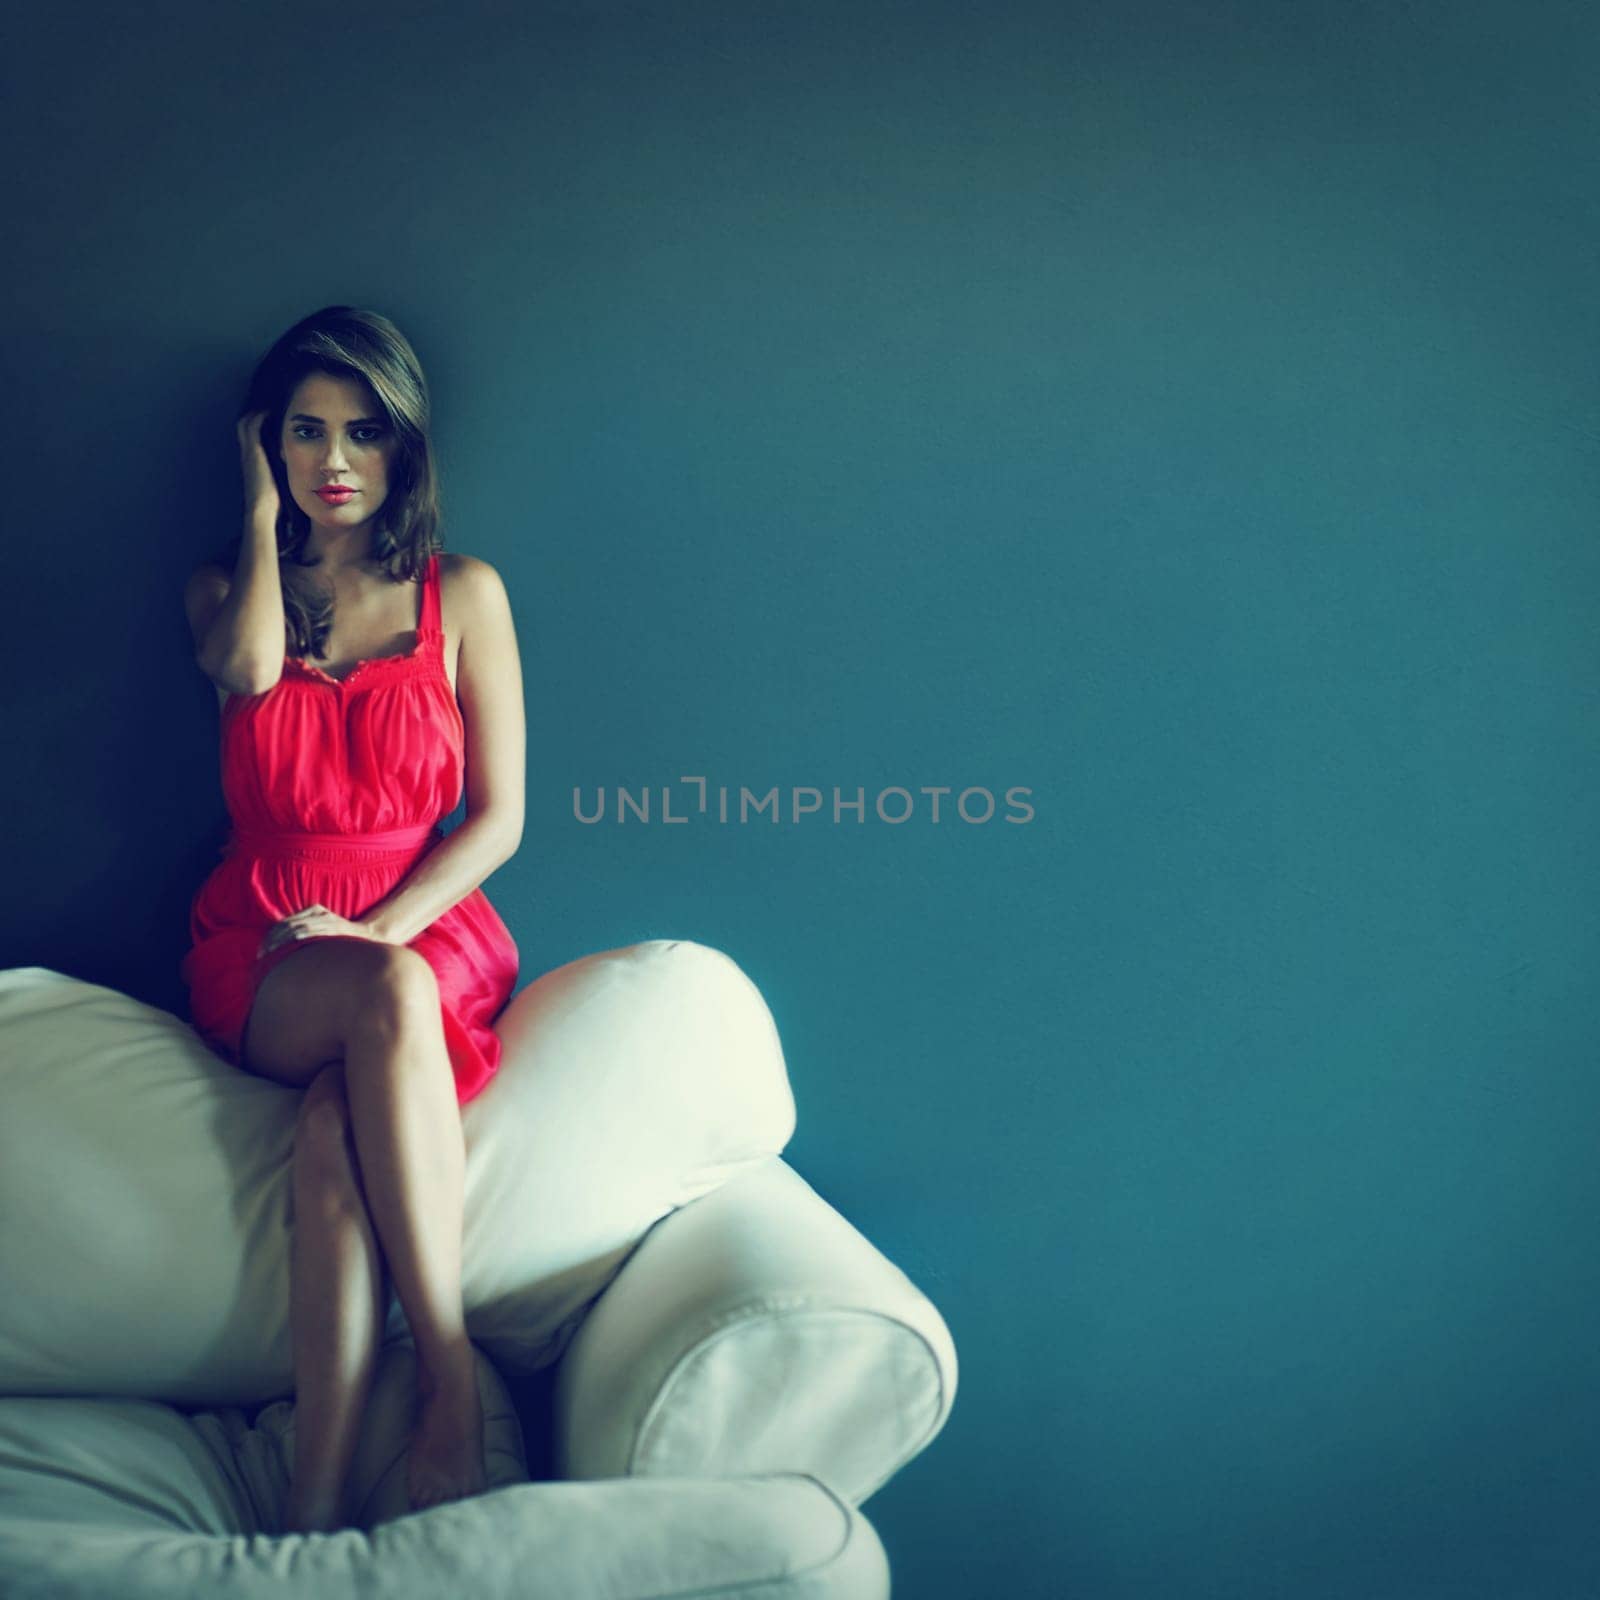 Beauty that commands your attention. A beautiful young woman with a pensive expression sitting on top of a sofa